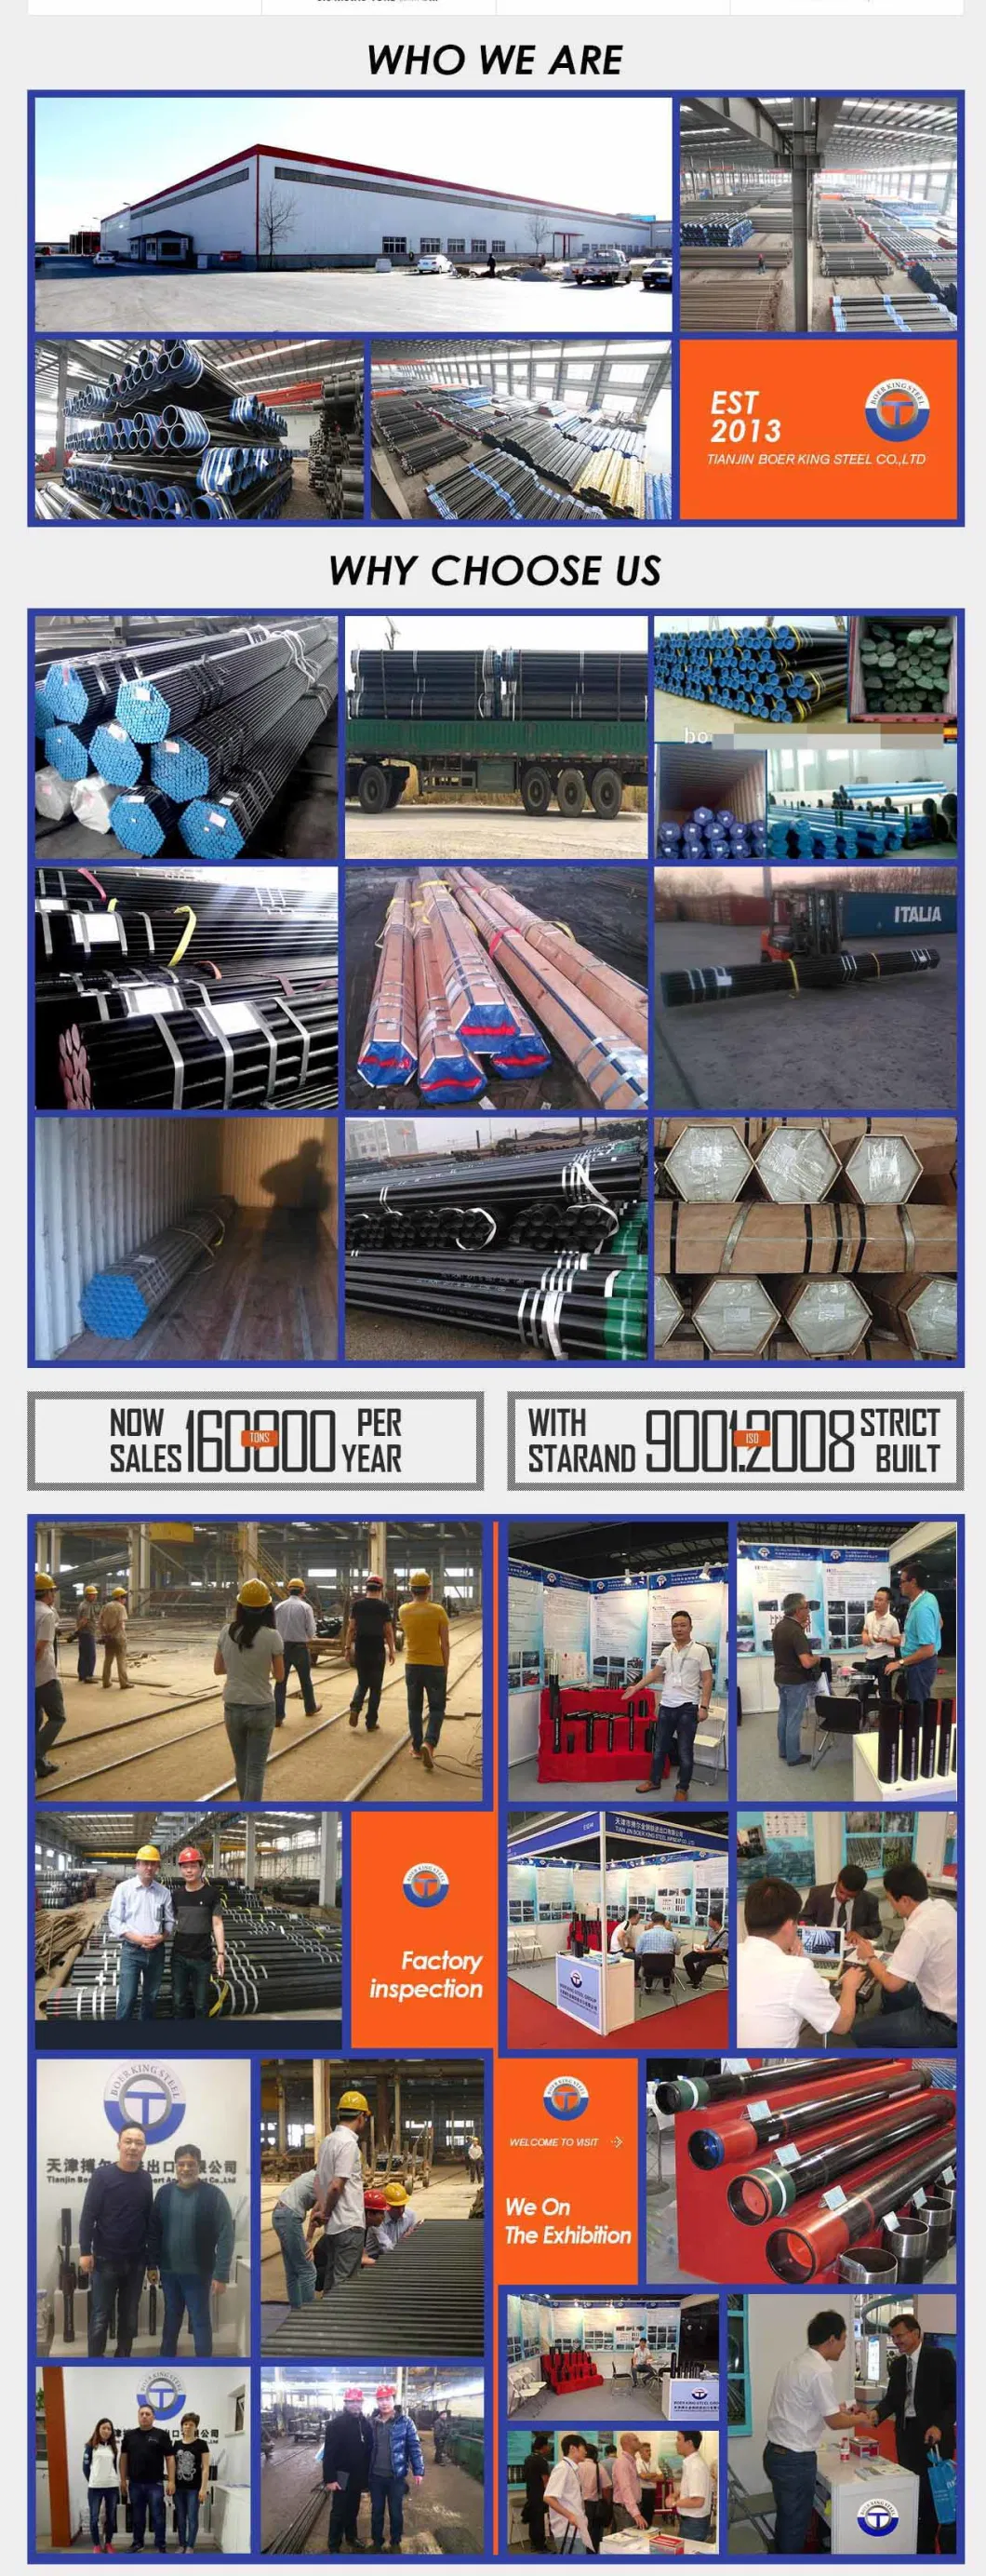 Good Sale P91 Carbon Steel Seamless Alloy Steel Pipe ASTM A335 P2 P5 P9 P11 Alloy Steel Tubes